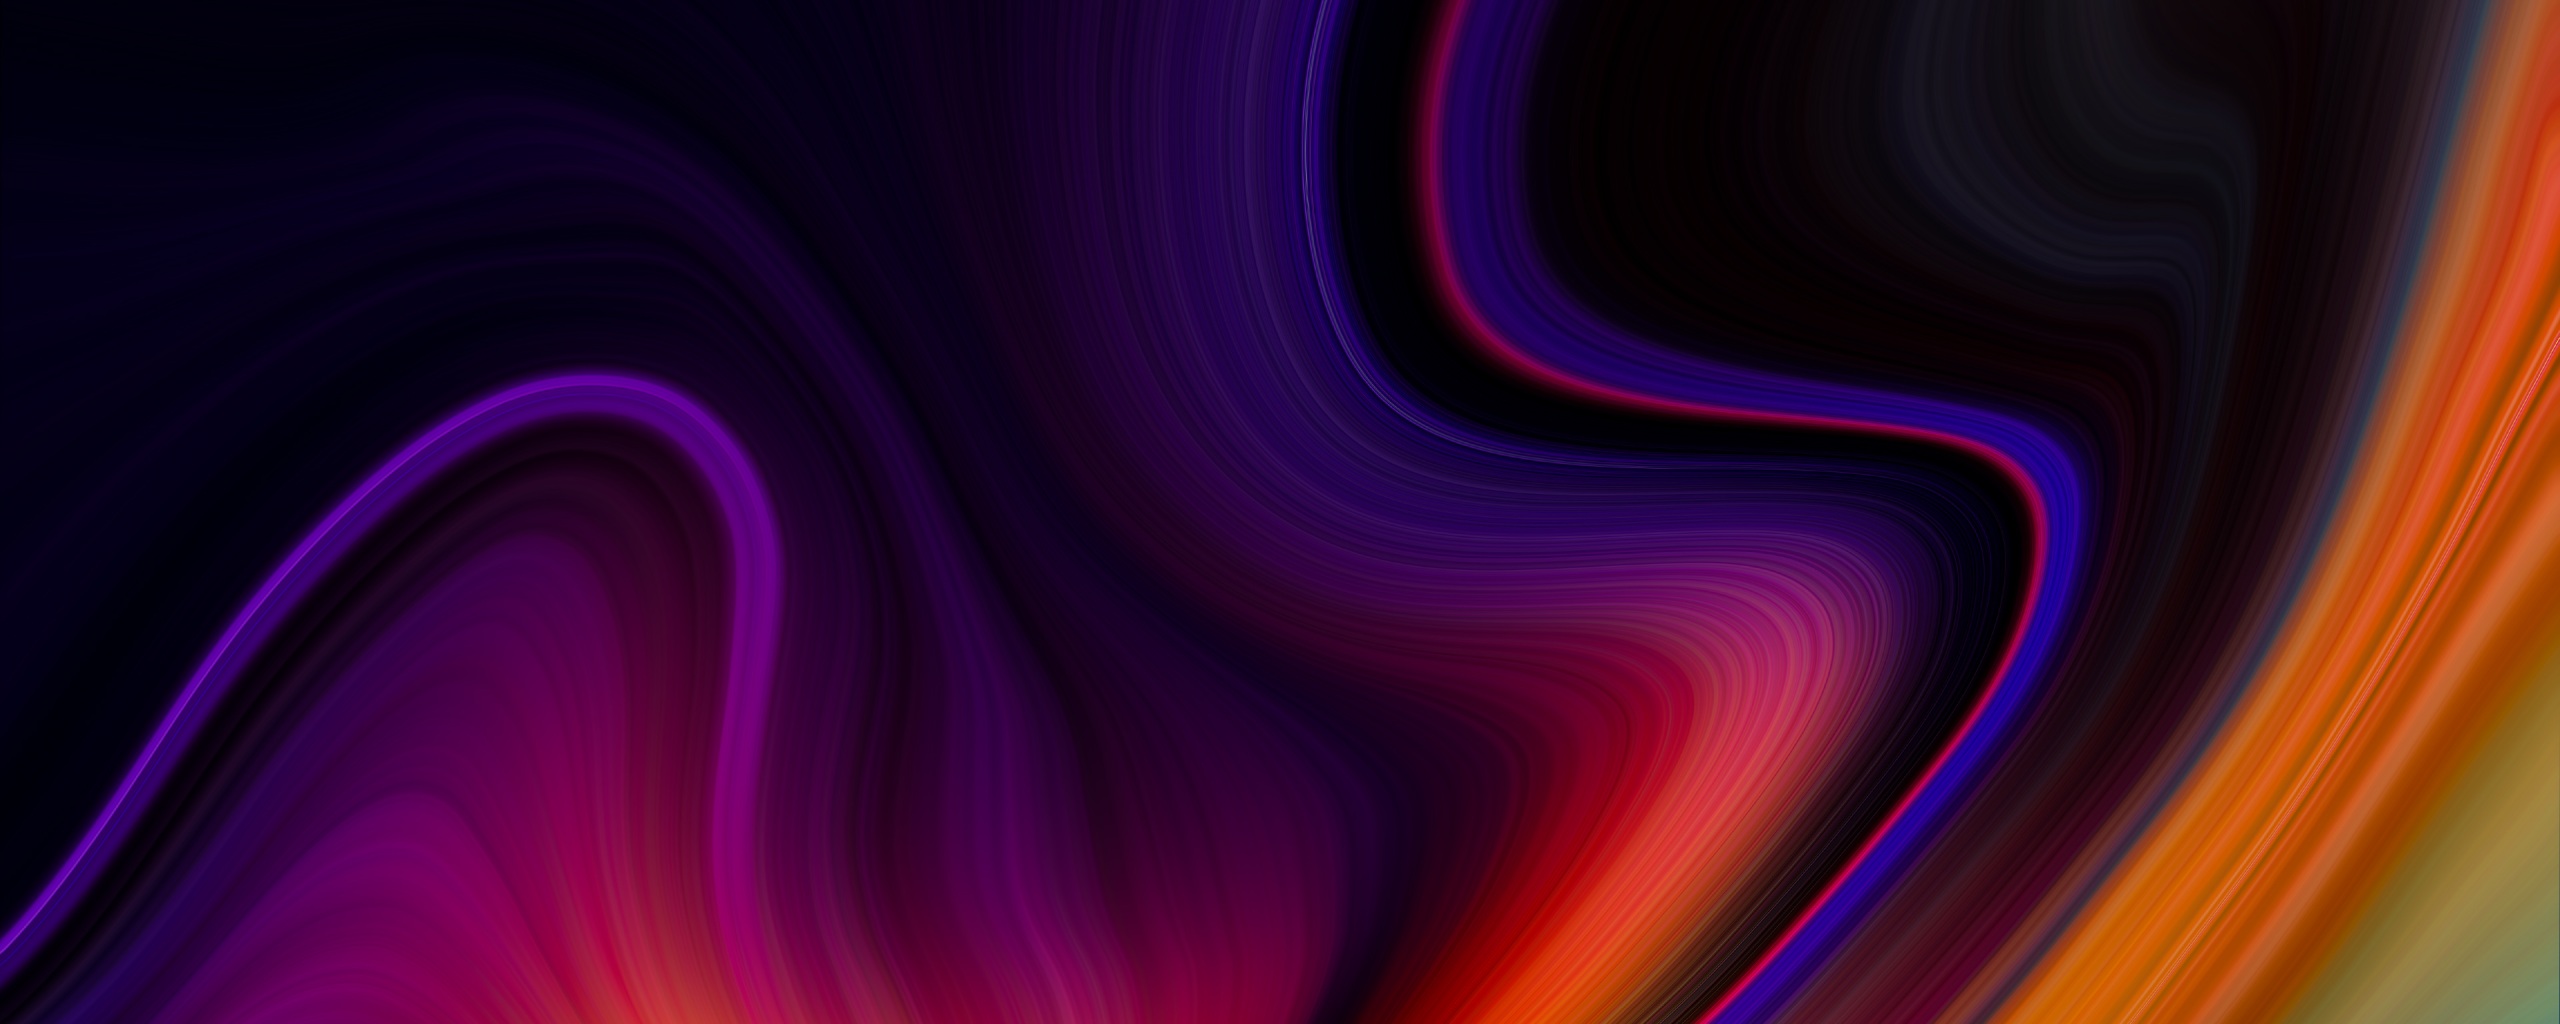 Formation Abstract Colors - 4k Wallpapers - 40.000+ ipad wallpapers 4k ...